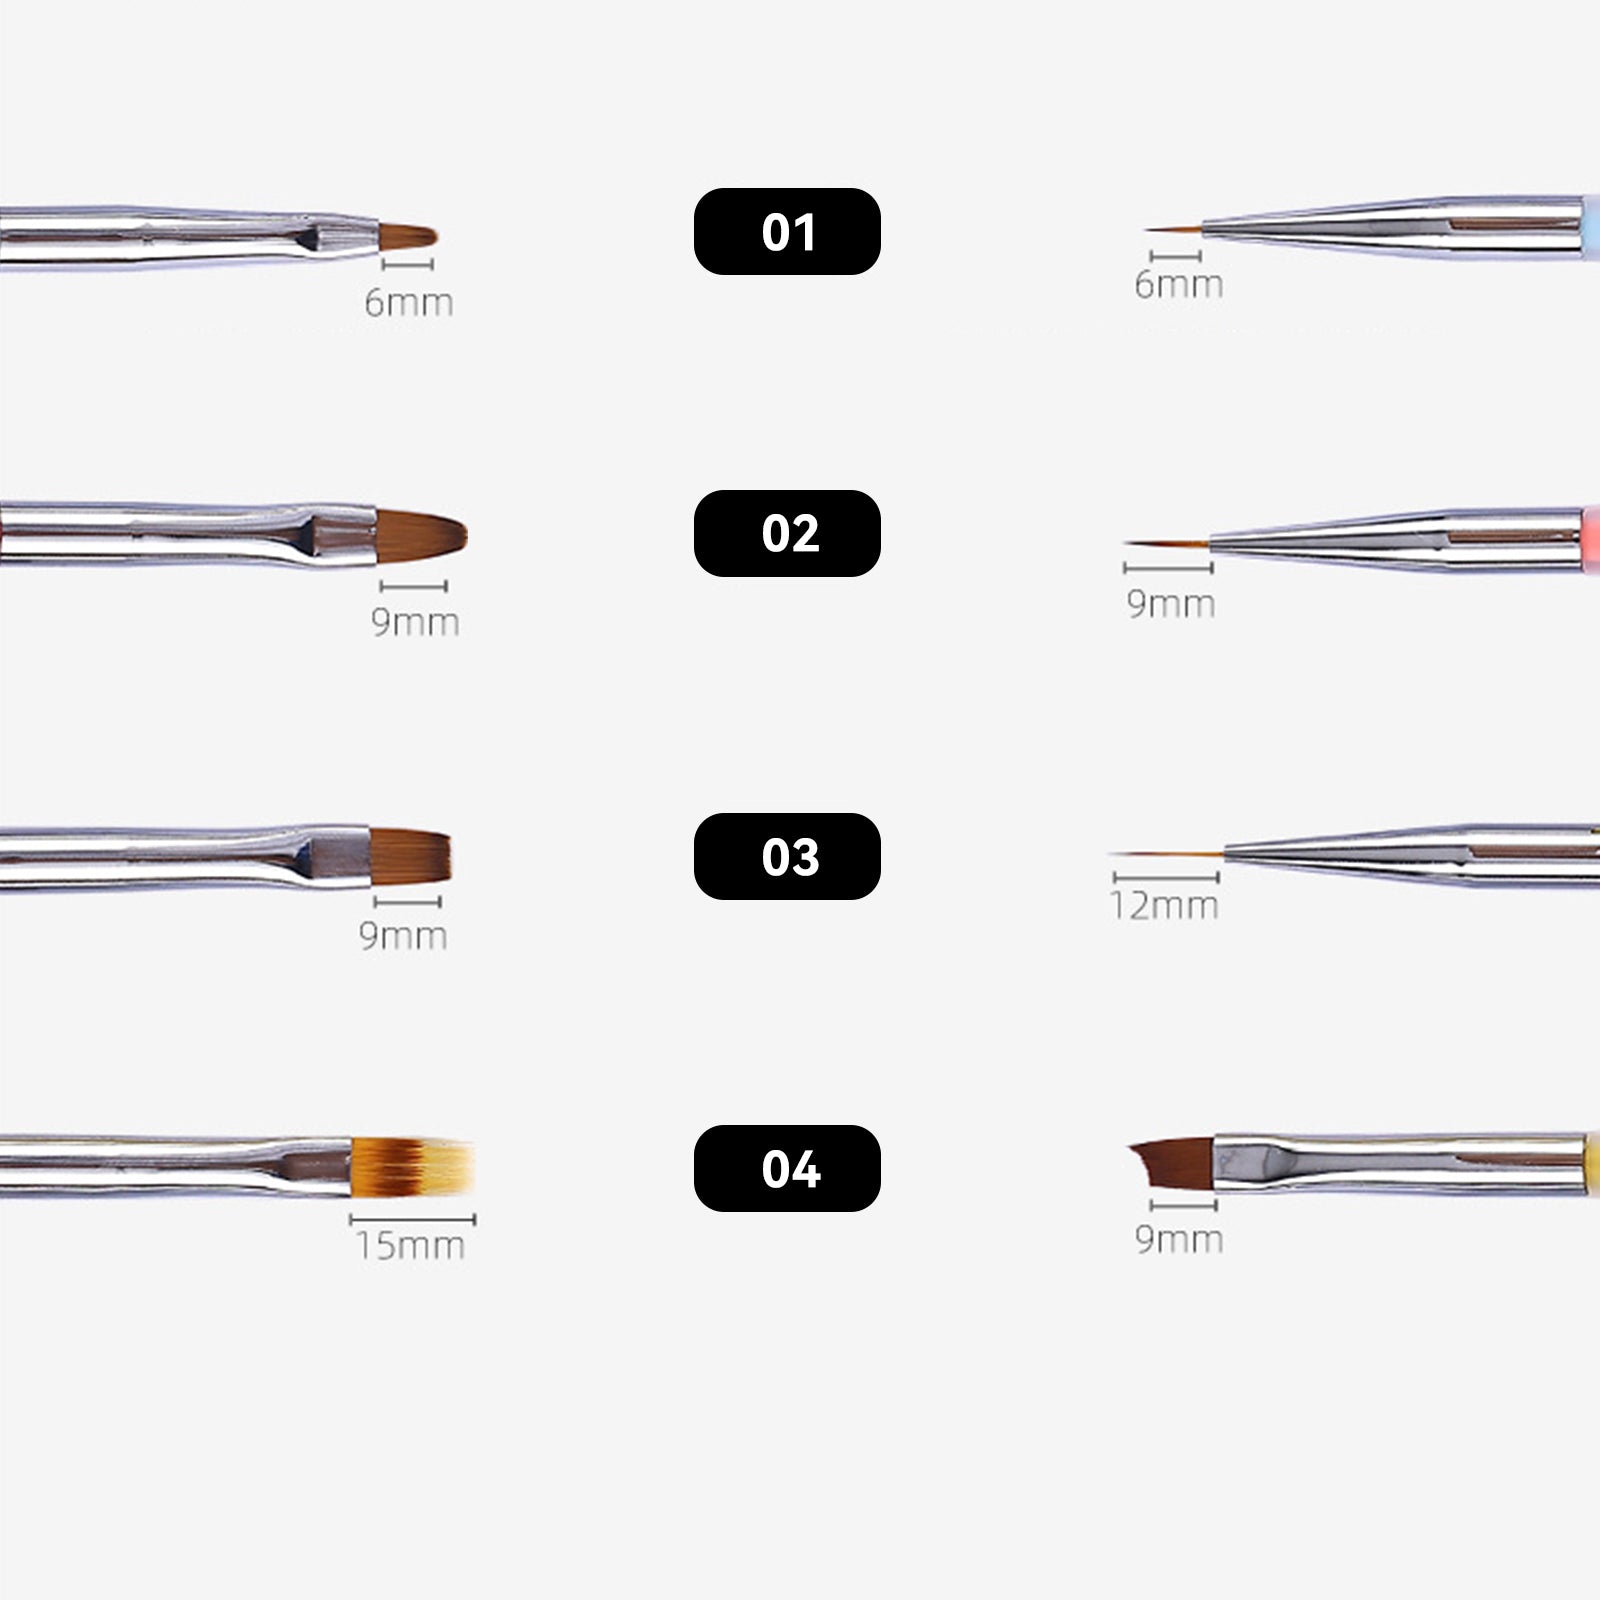 How to Use Different kinds of Nail Art Brushes? – Vettsy